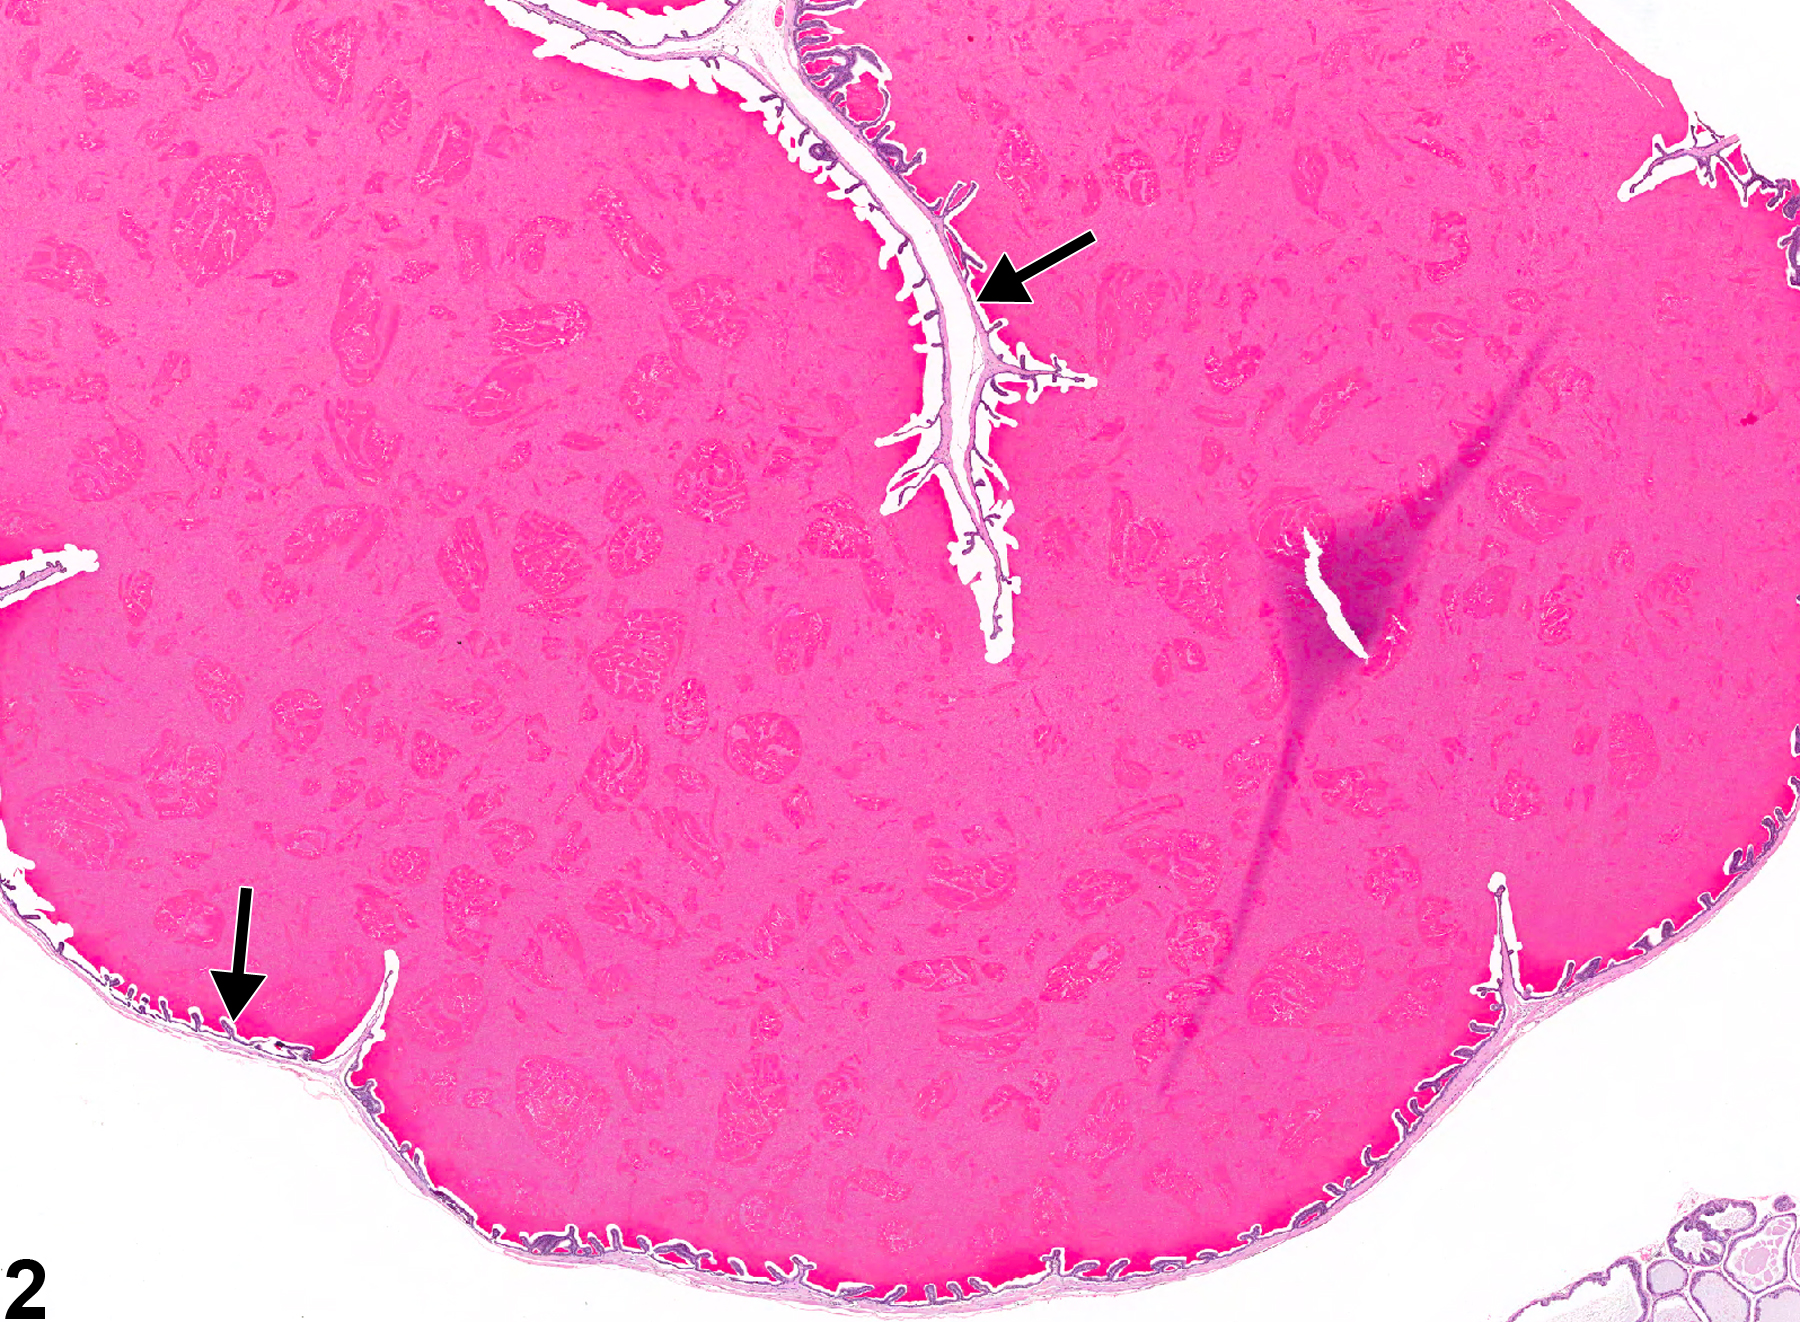 Image of dilation in the seminal vesicle from a male F344/N rat in an chronic study